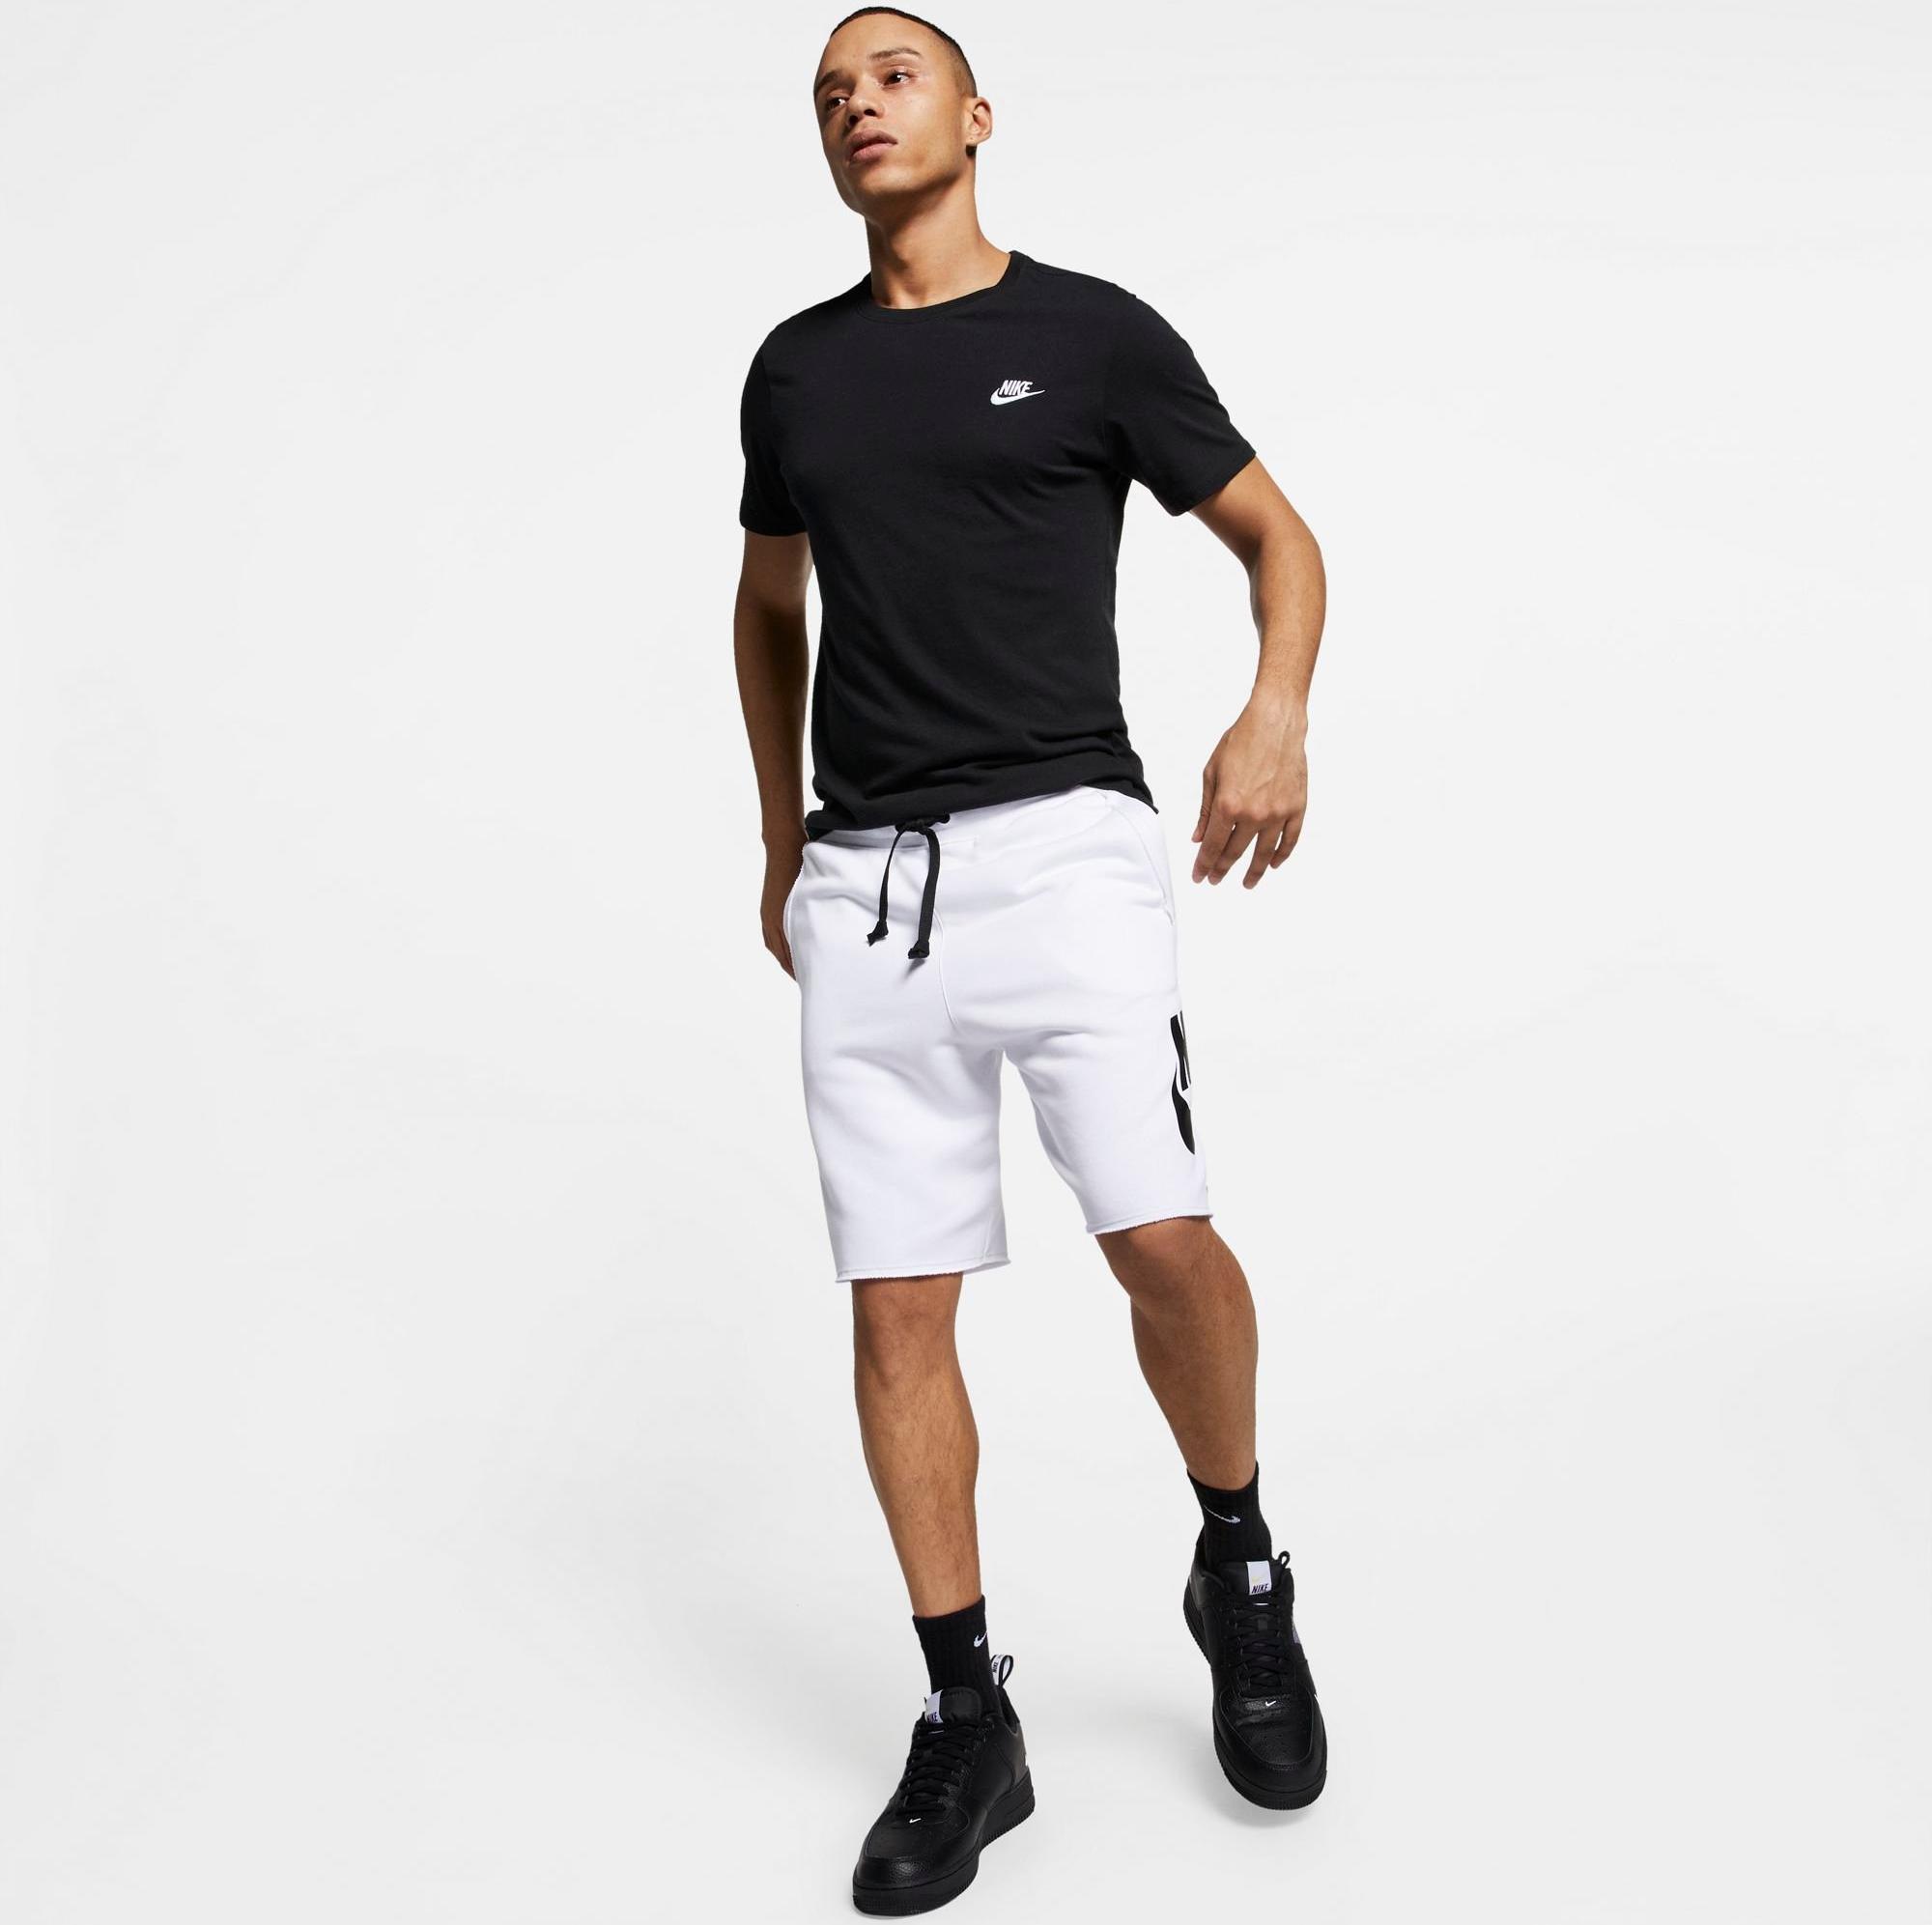 Nike Workout Clothes You Can’t Work Without